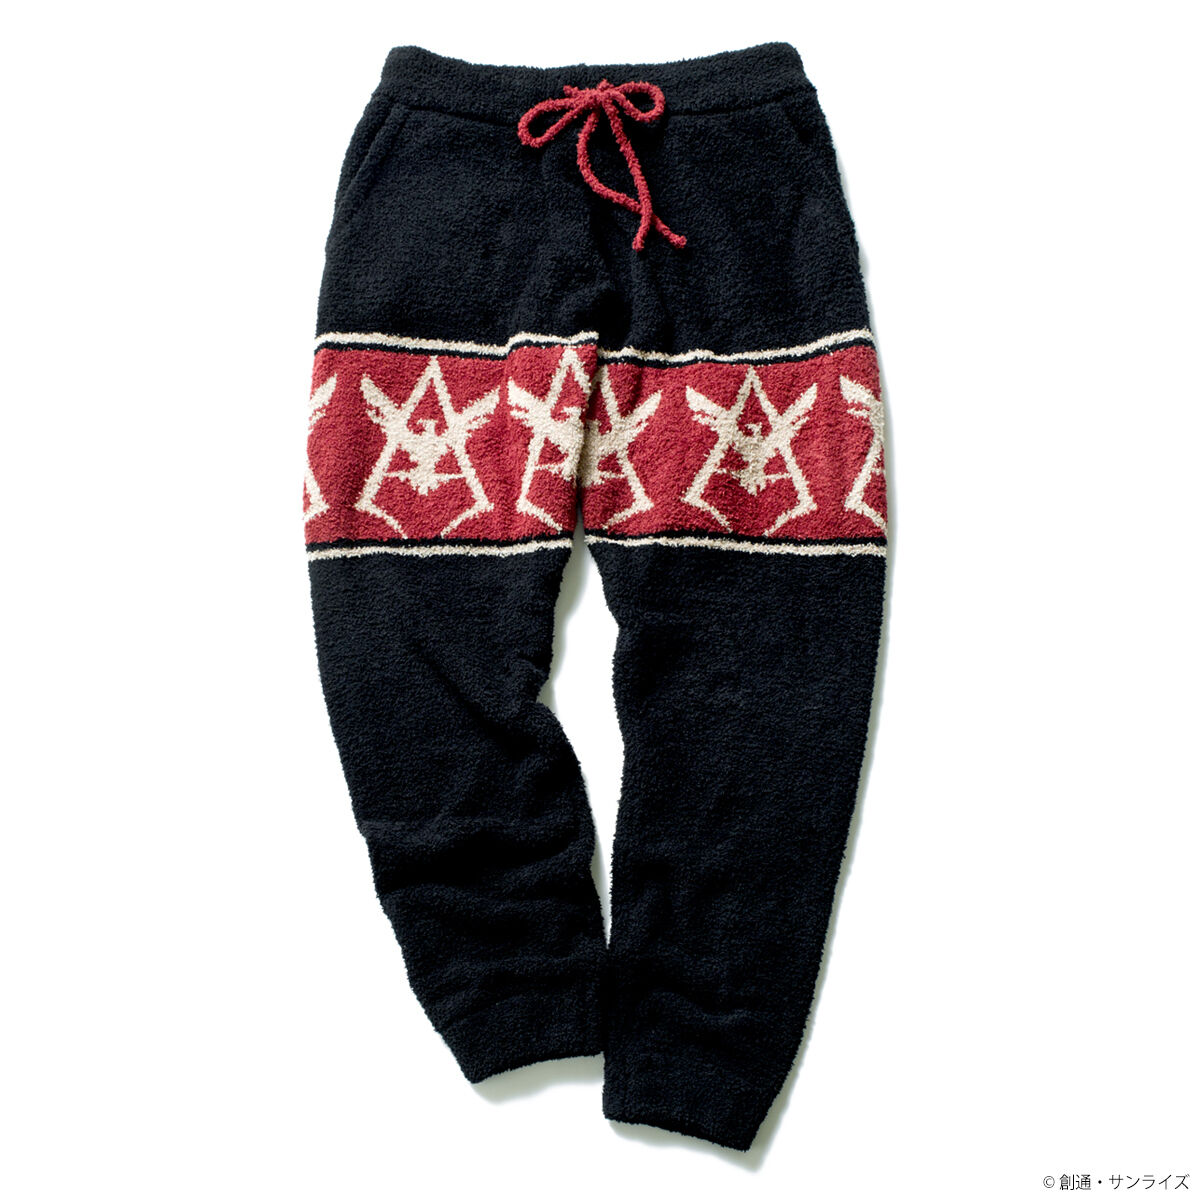 STRICT-G Mobile Suit Gundam Fluffy Loungewear Long Pants Red Comet 